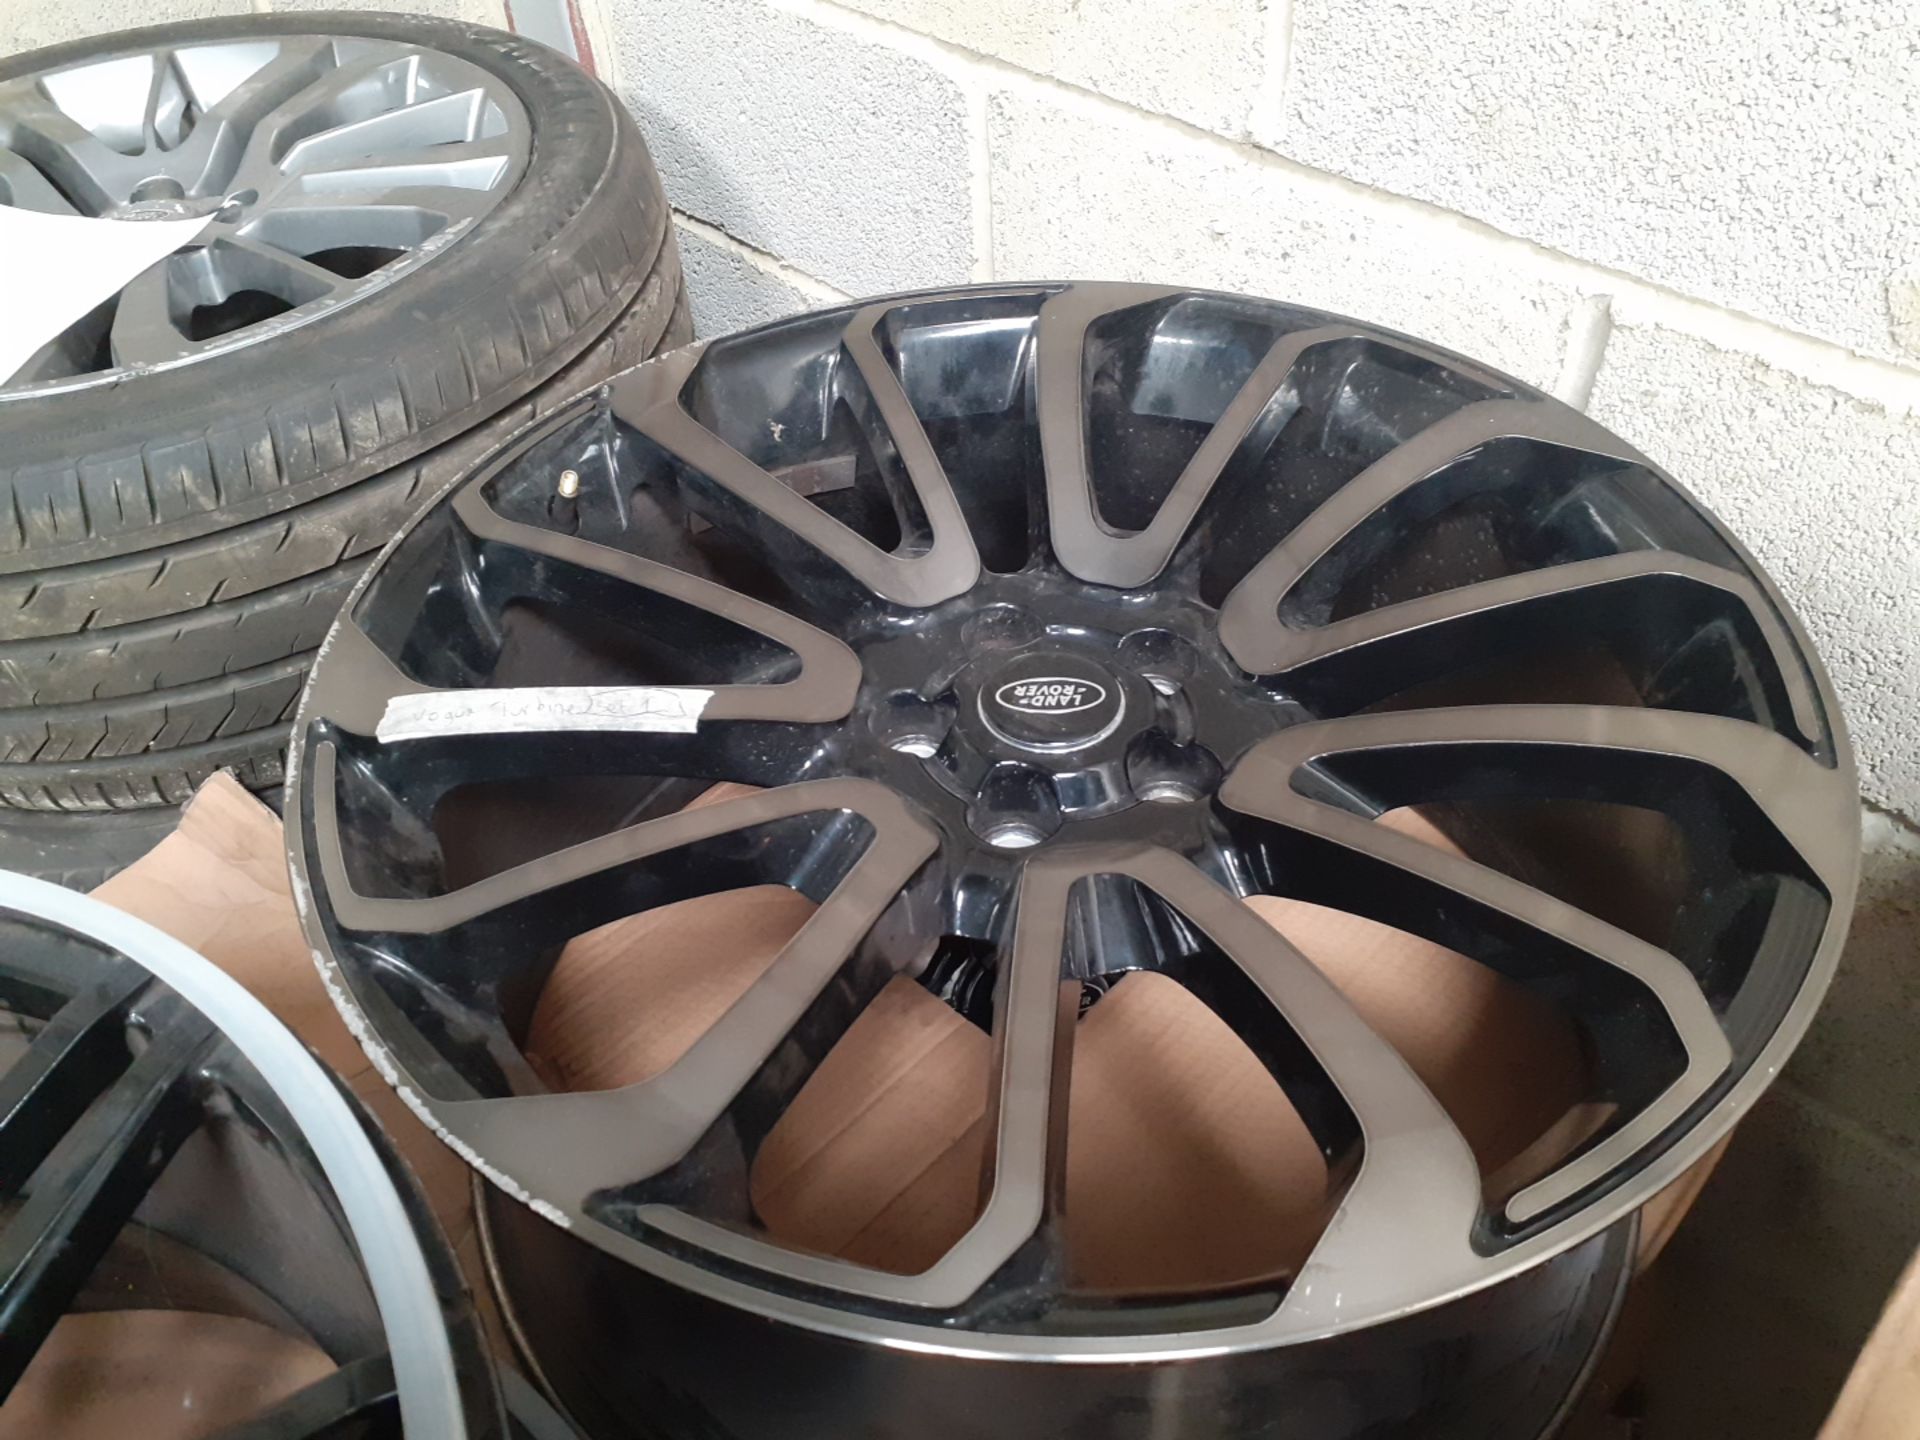 JOB LOT OF 30 SETS OF ALLOY WHEELS WITH TYRES, LAND ROVER RANGE ROVER, OVER £31K RRP *NO VAT* - Image 5 of 17